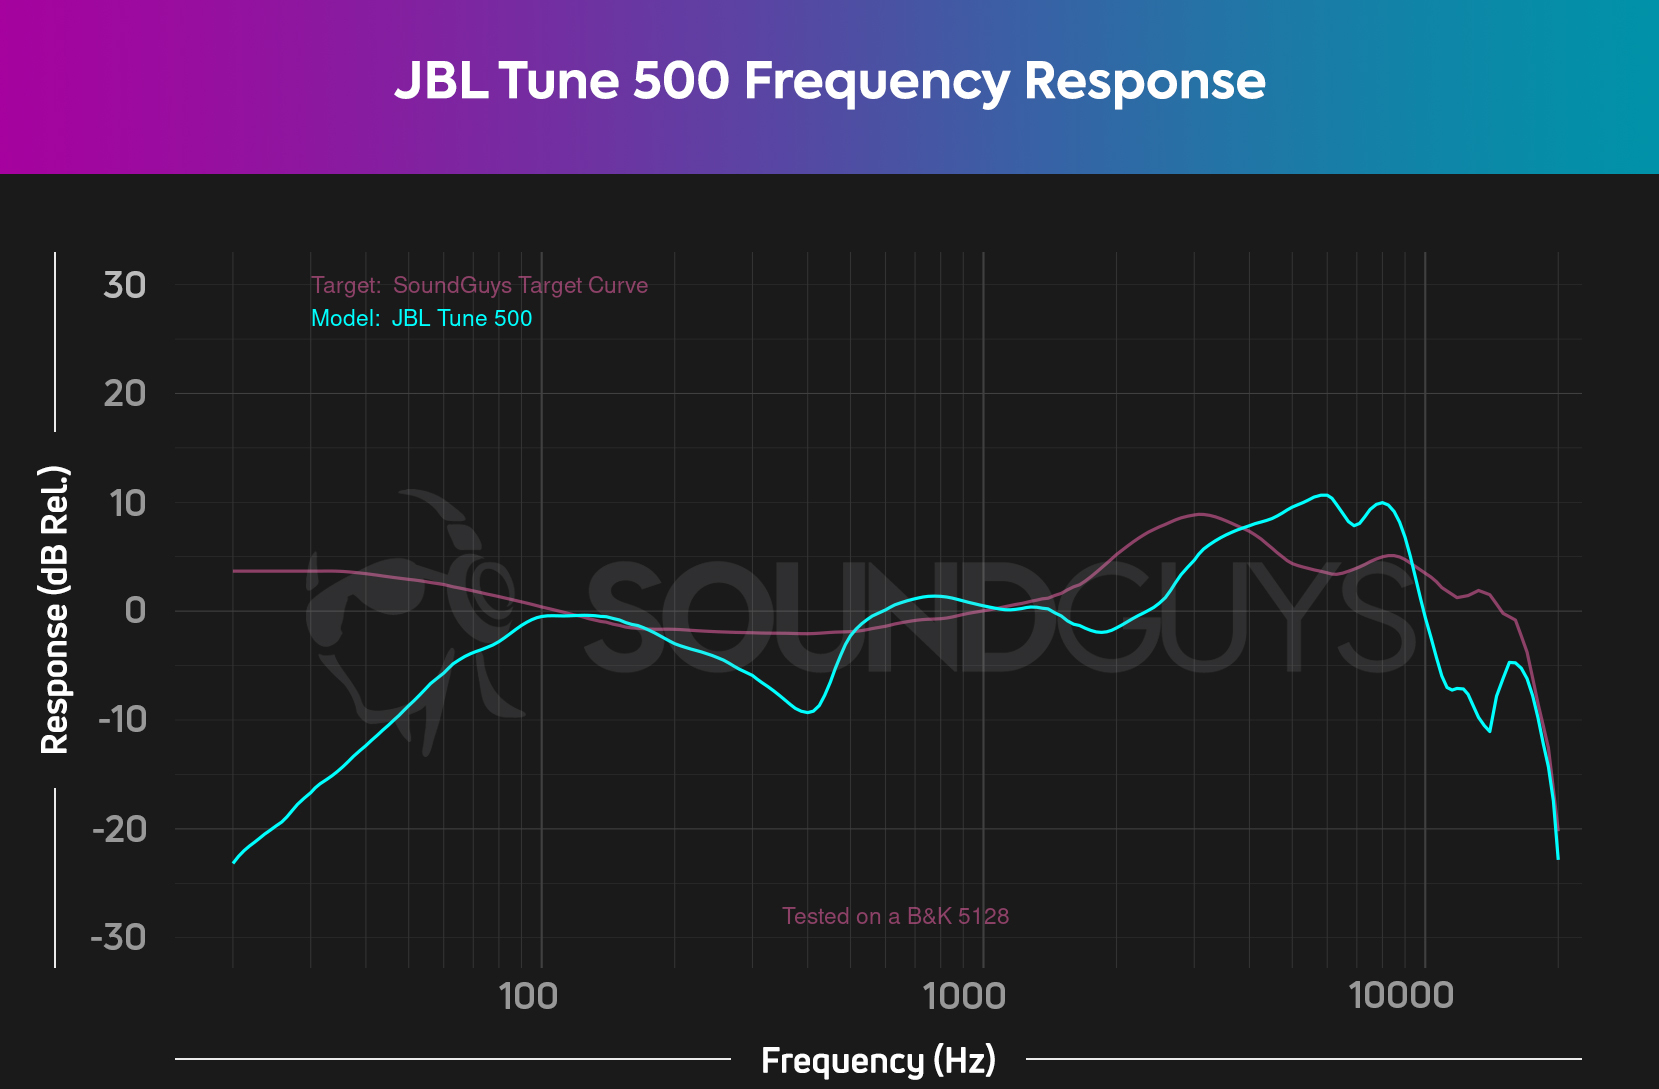 A chart showing the JBL Tune 500 frequency response, with a lack of sub bass and some deviation from the ideal curve in the mid and high end.